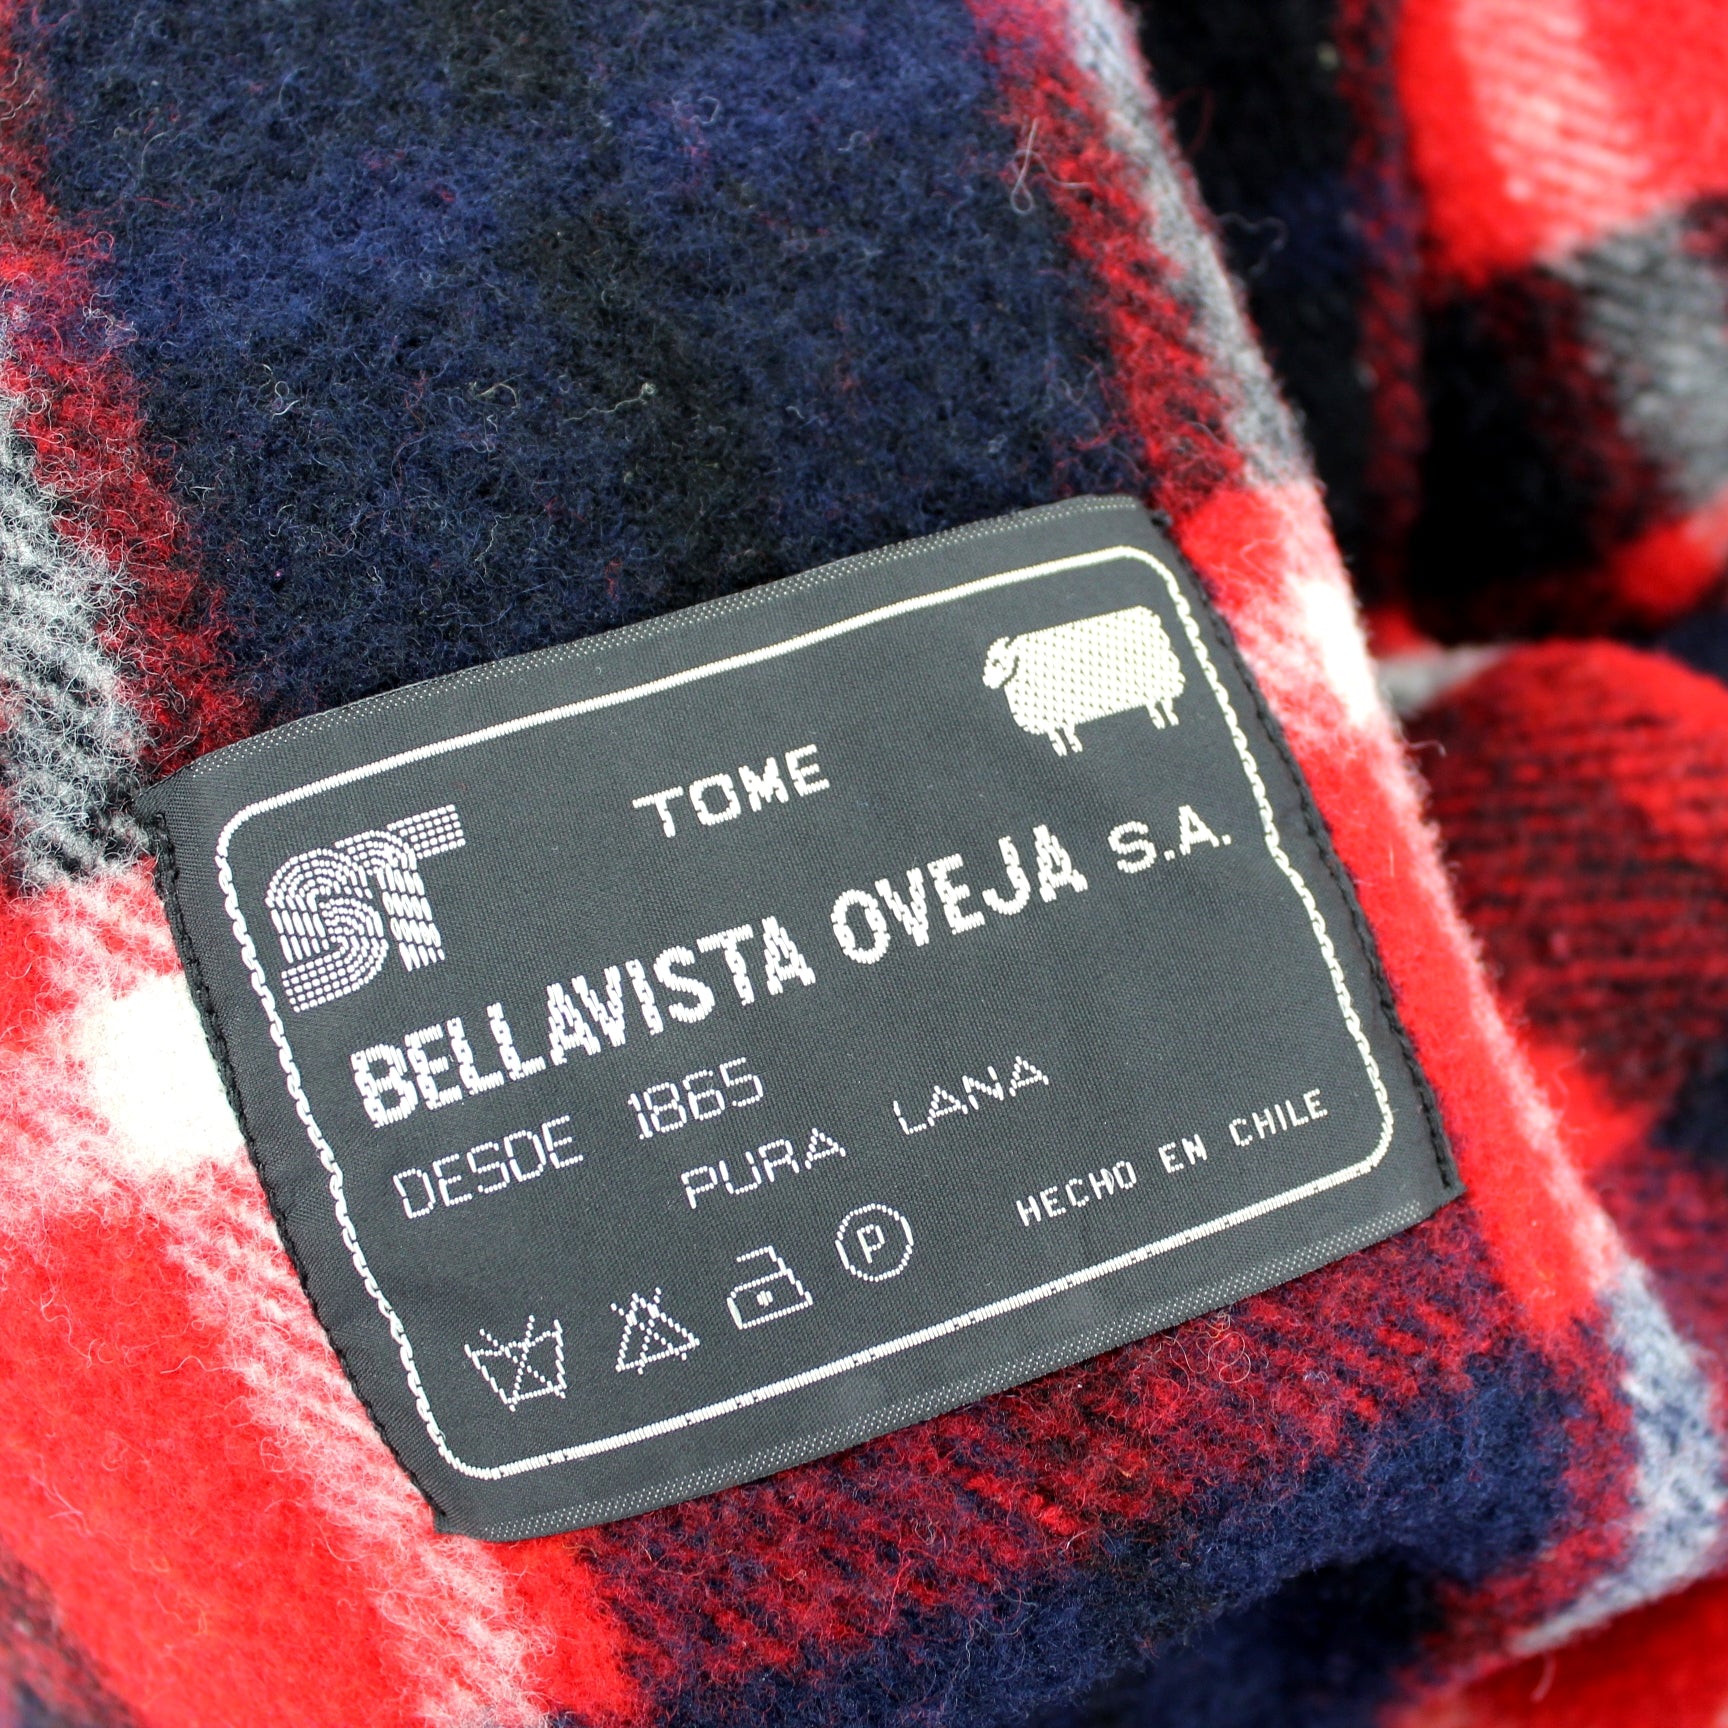 Bellavista Oveja Wool Throw Blanket Red White Blue Black Plaid 56" X 65" 2 Available maker tag for wool throw